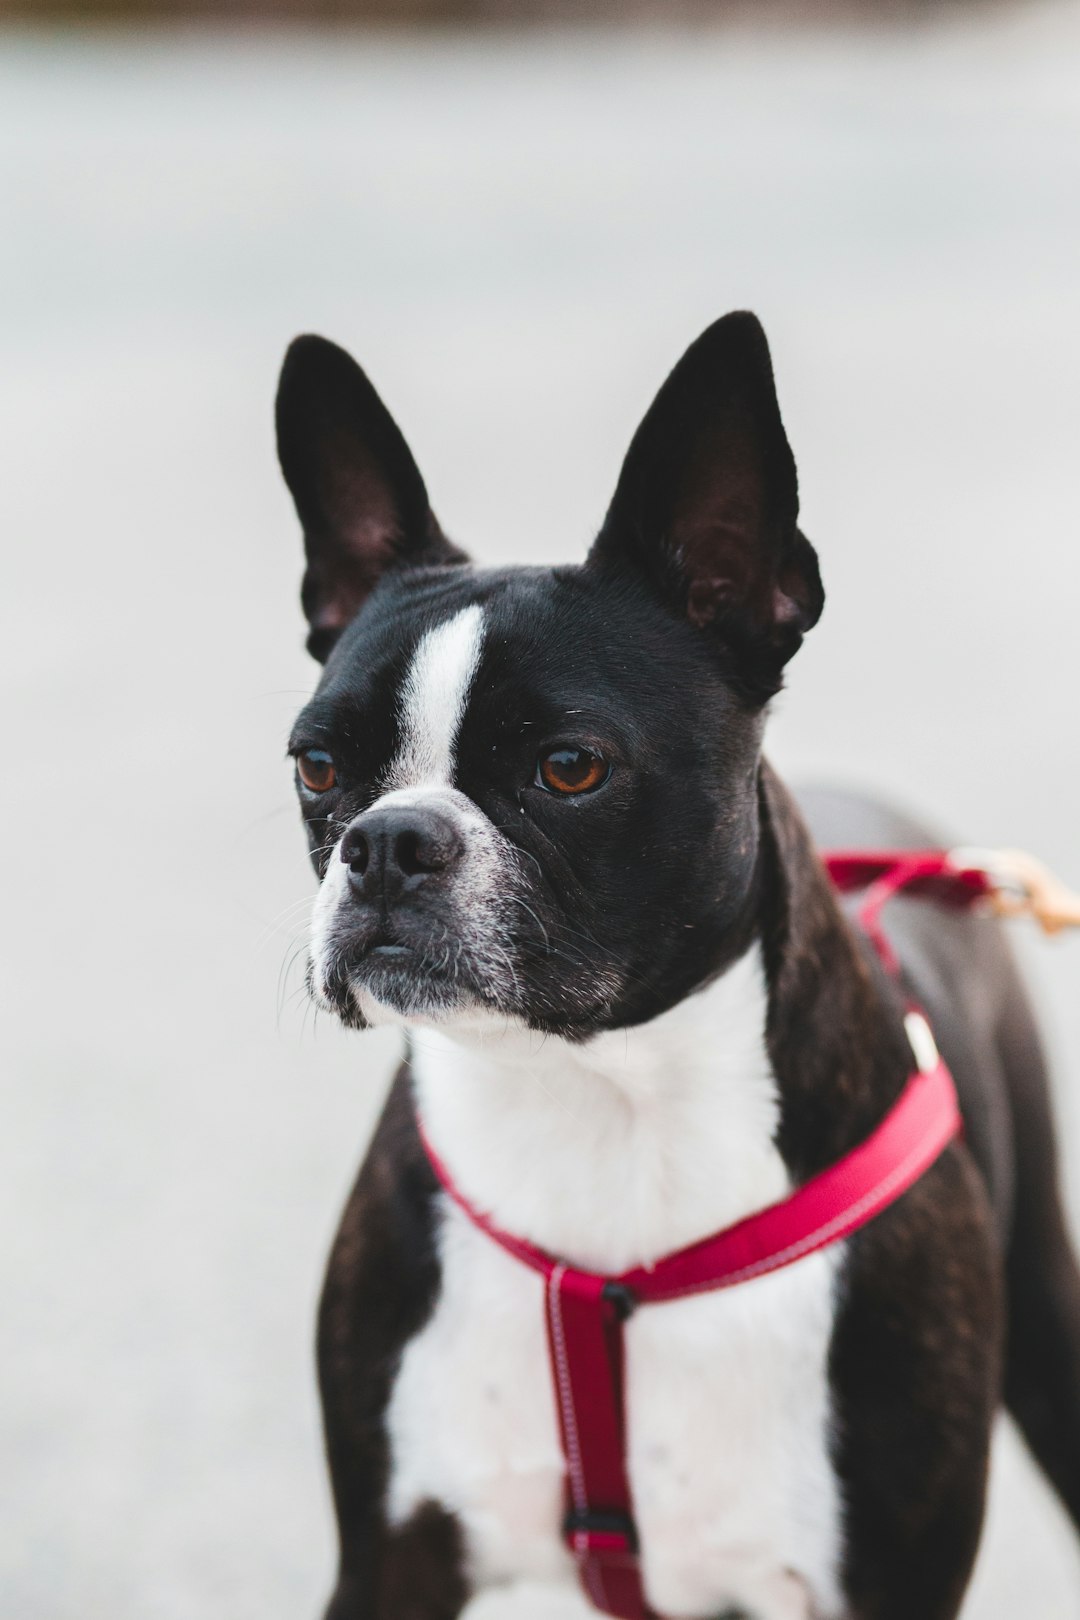 black and white short coated dog with red collar